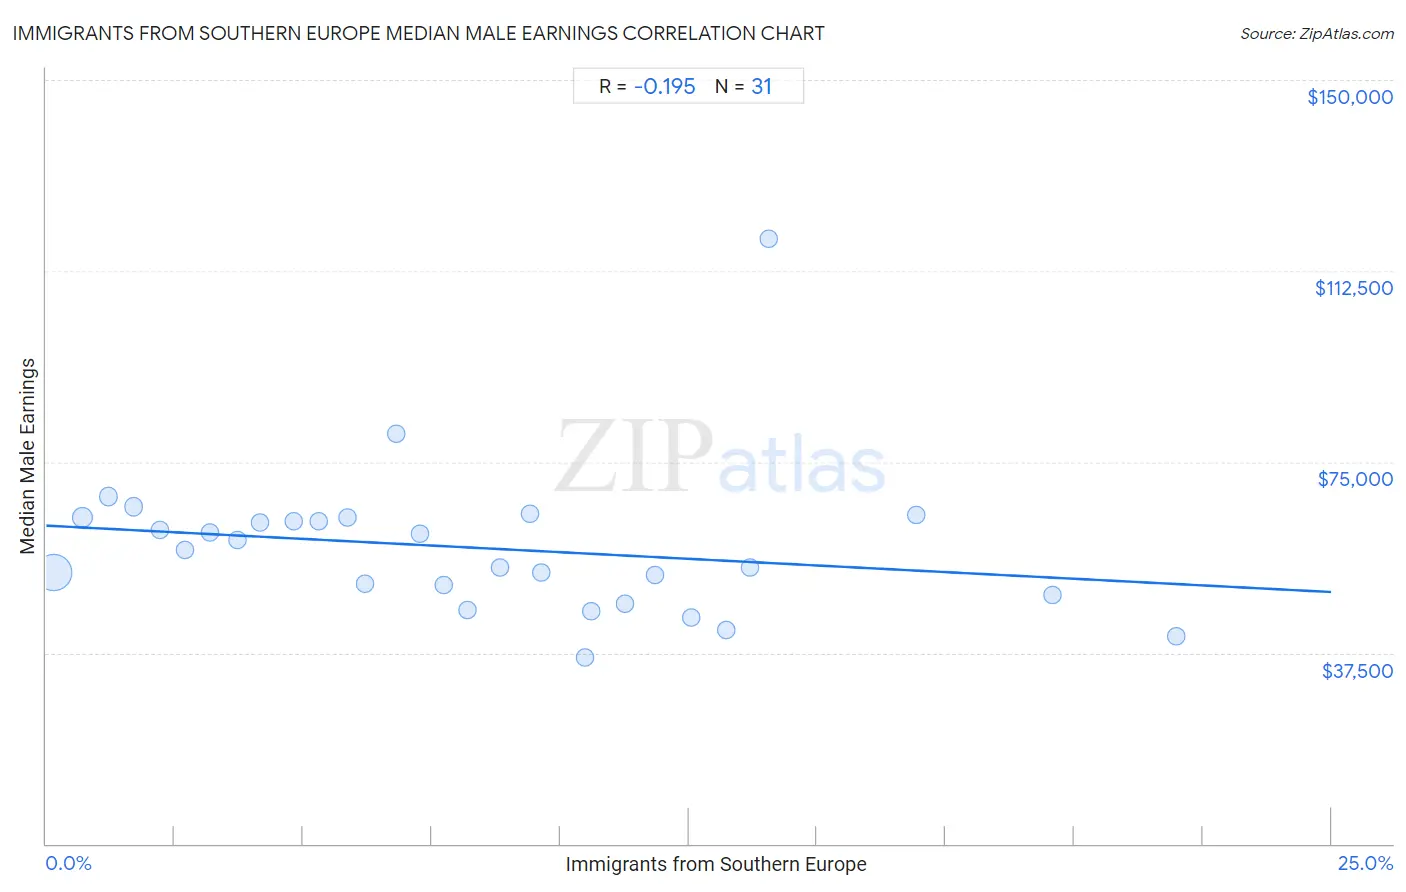 Immigrants from Southern Europe Median Male Earnings